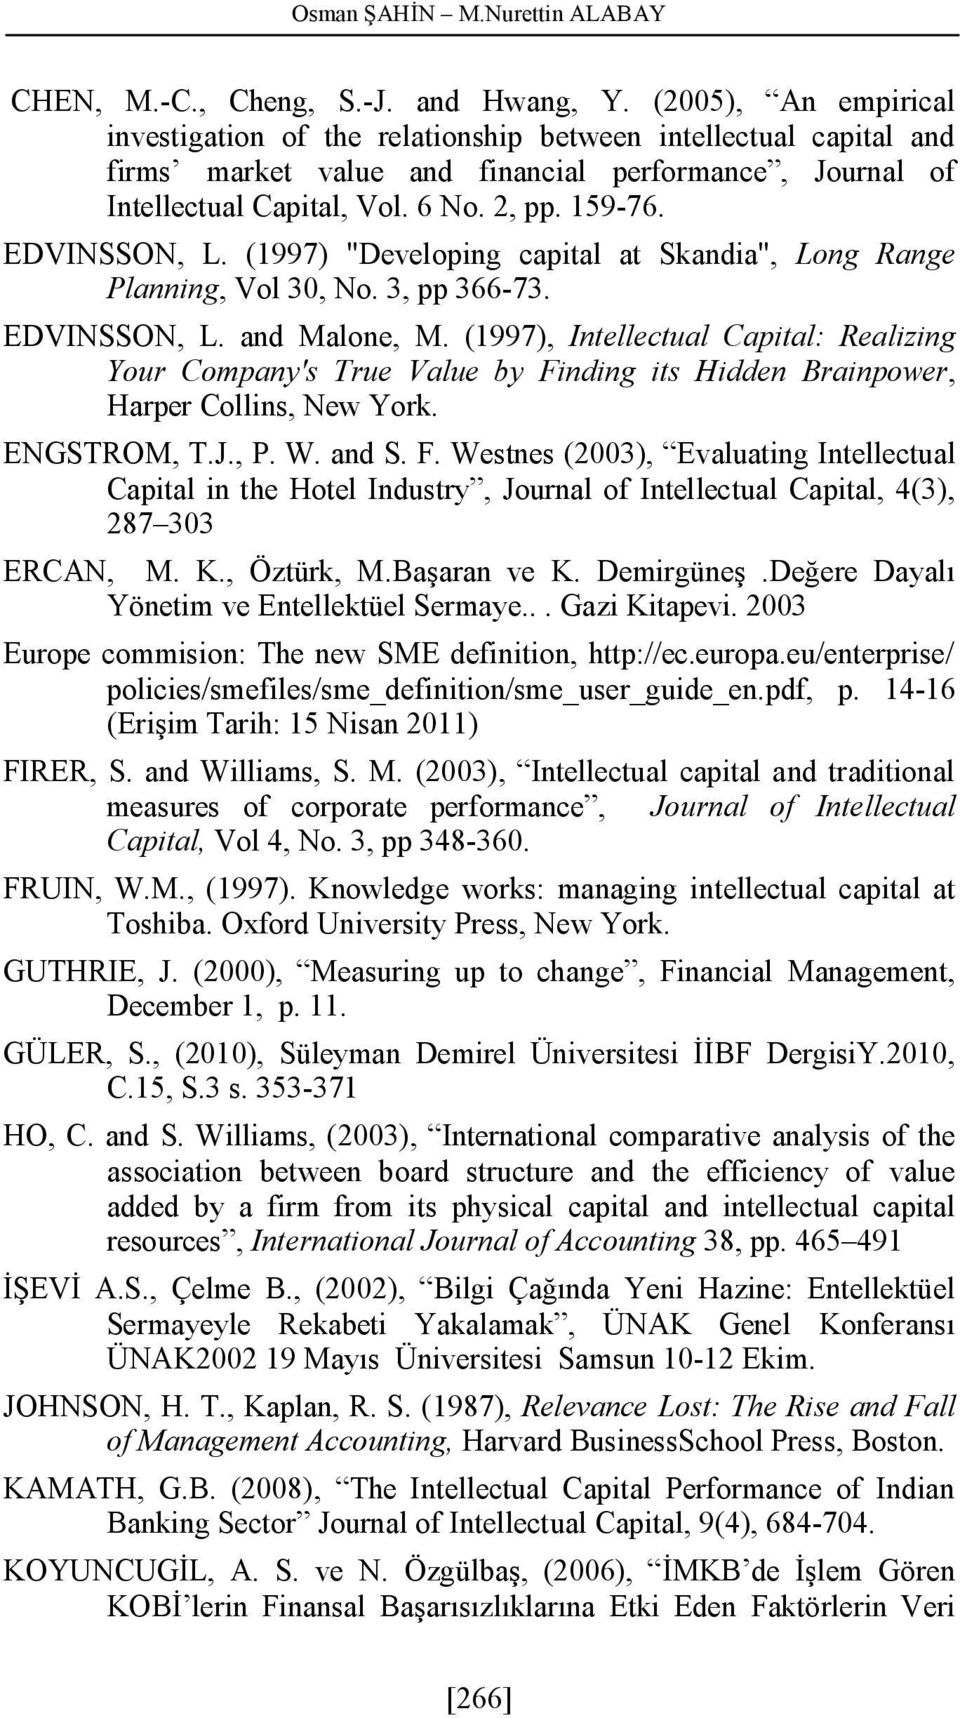 EDVINSSON, L. (1997) "Developing capital at Skandia", Long Range Planning, Vol 30, No. 3, pp 366-73. EDVINSSON, L. and Malone, M.